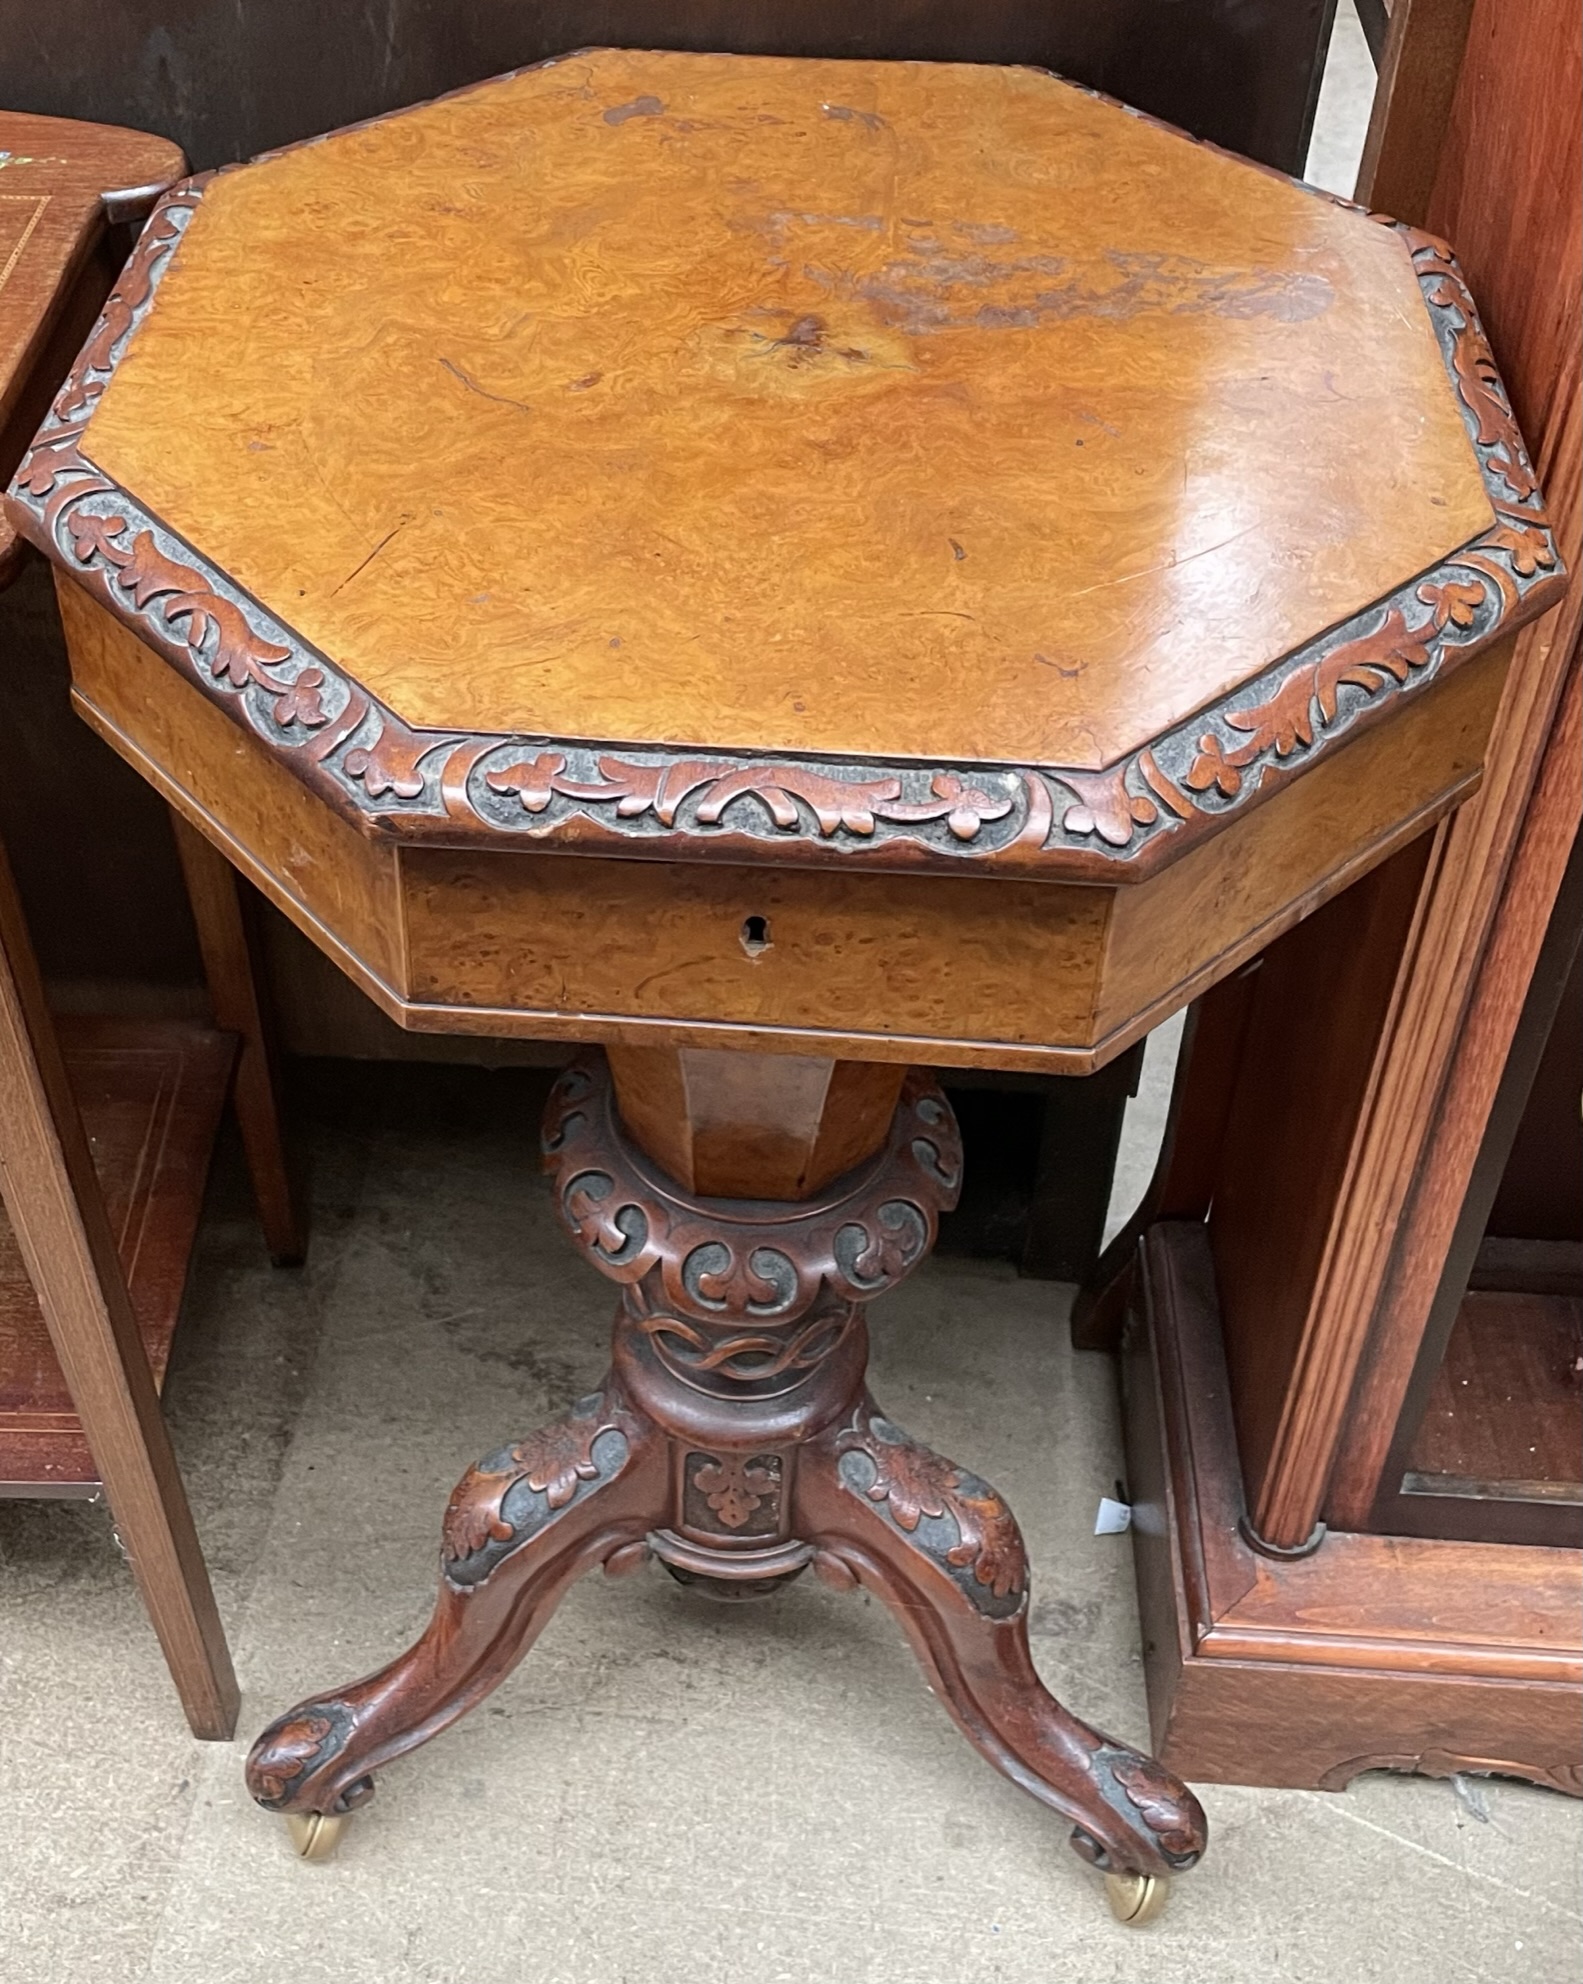 A Victorian walnut work table with an octagonal top and central well on a carved tripod base